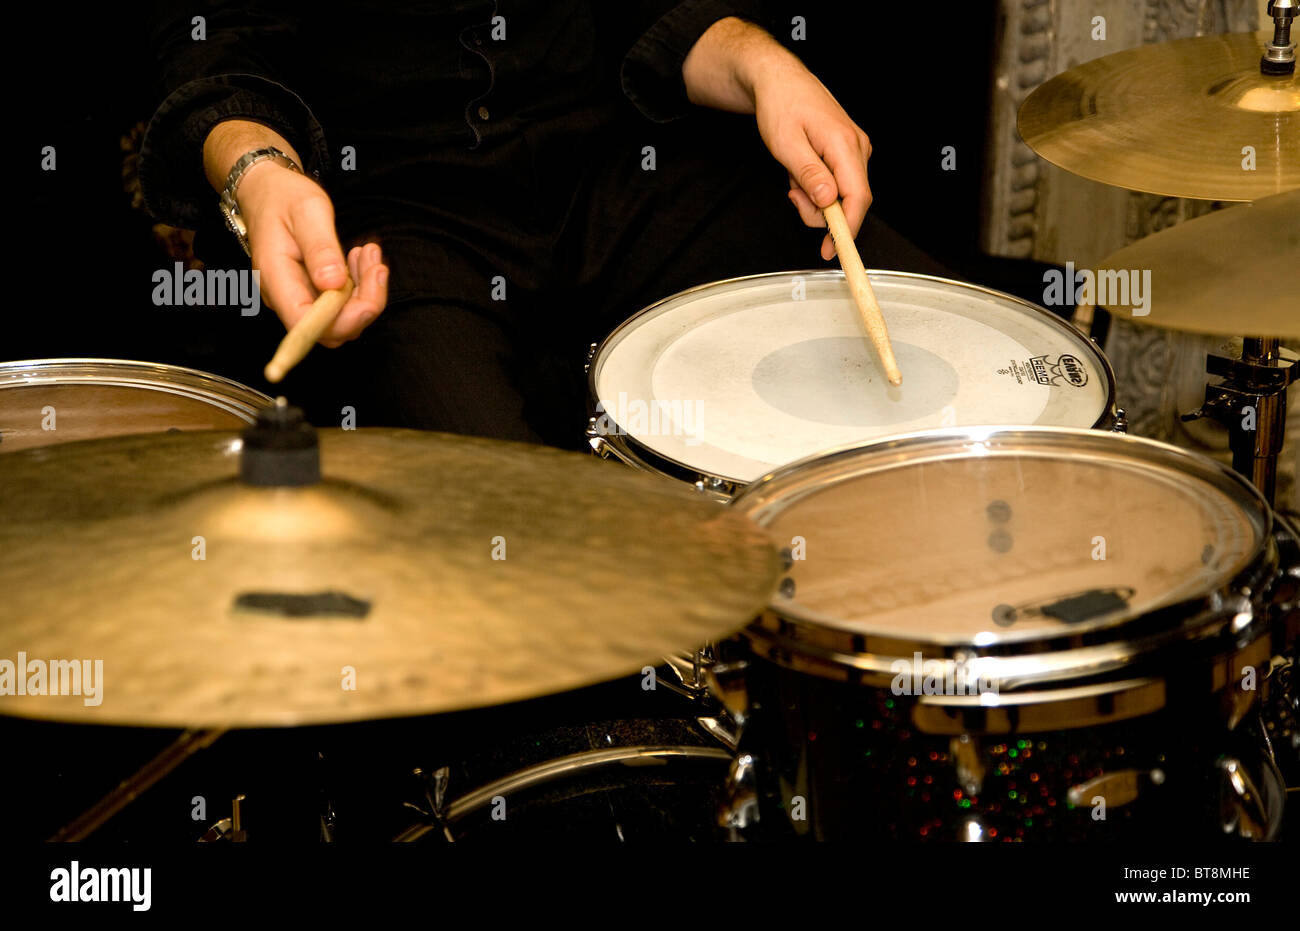 Drums being played in a band Stock Photo